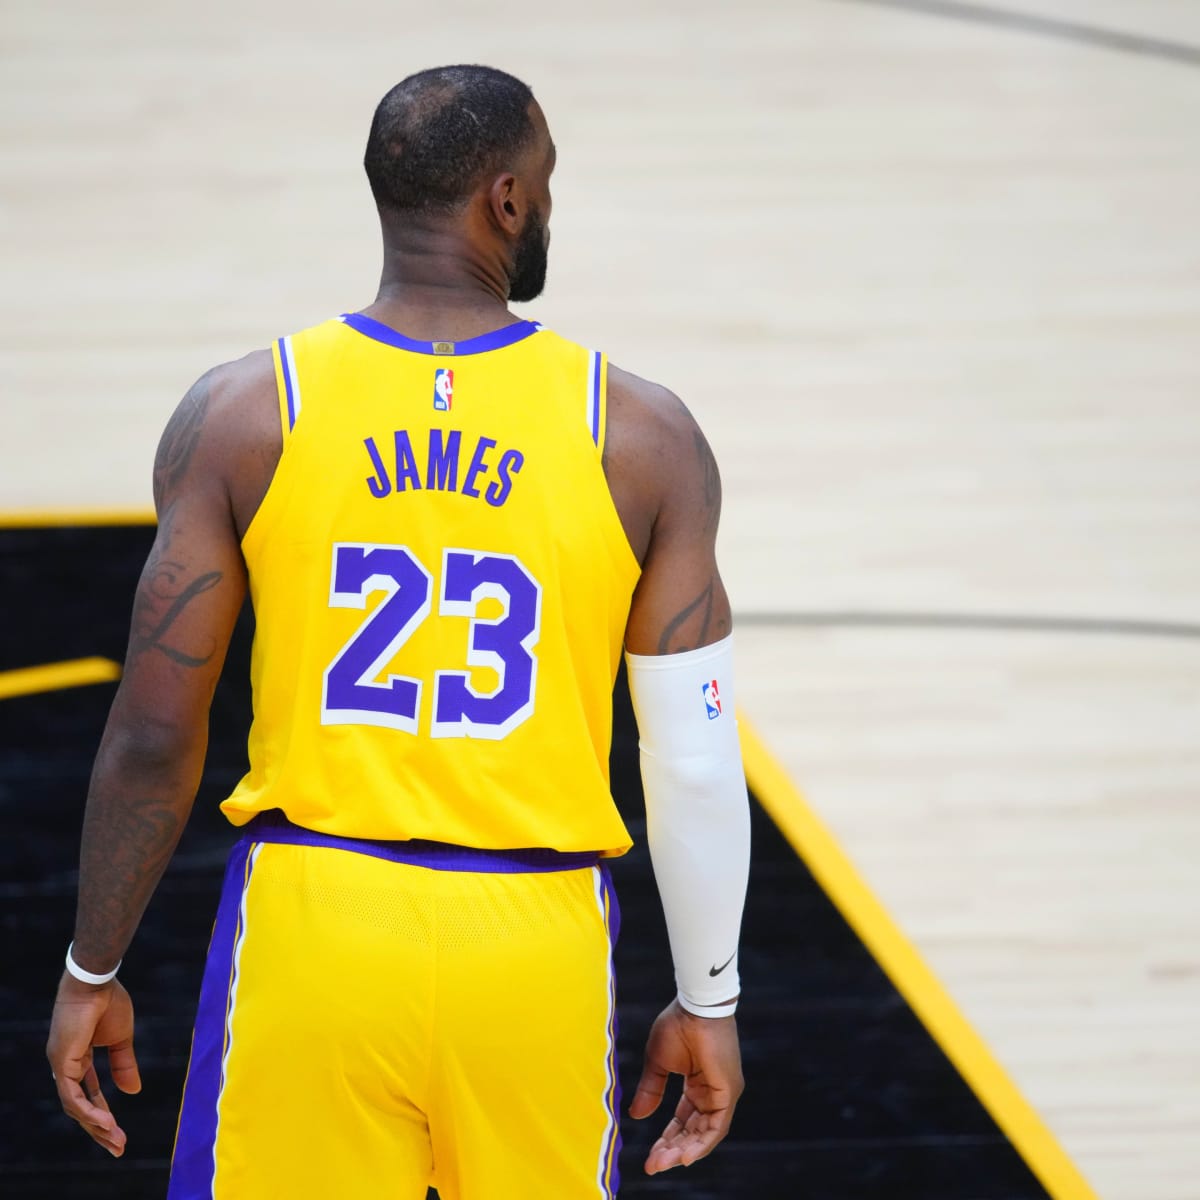 Lakers News: LeBron James Reportedly Switching Jersey Numbers